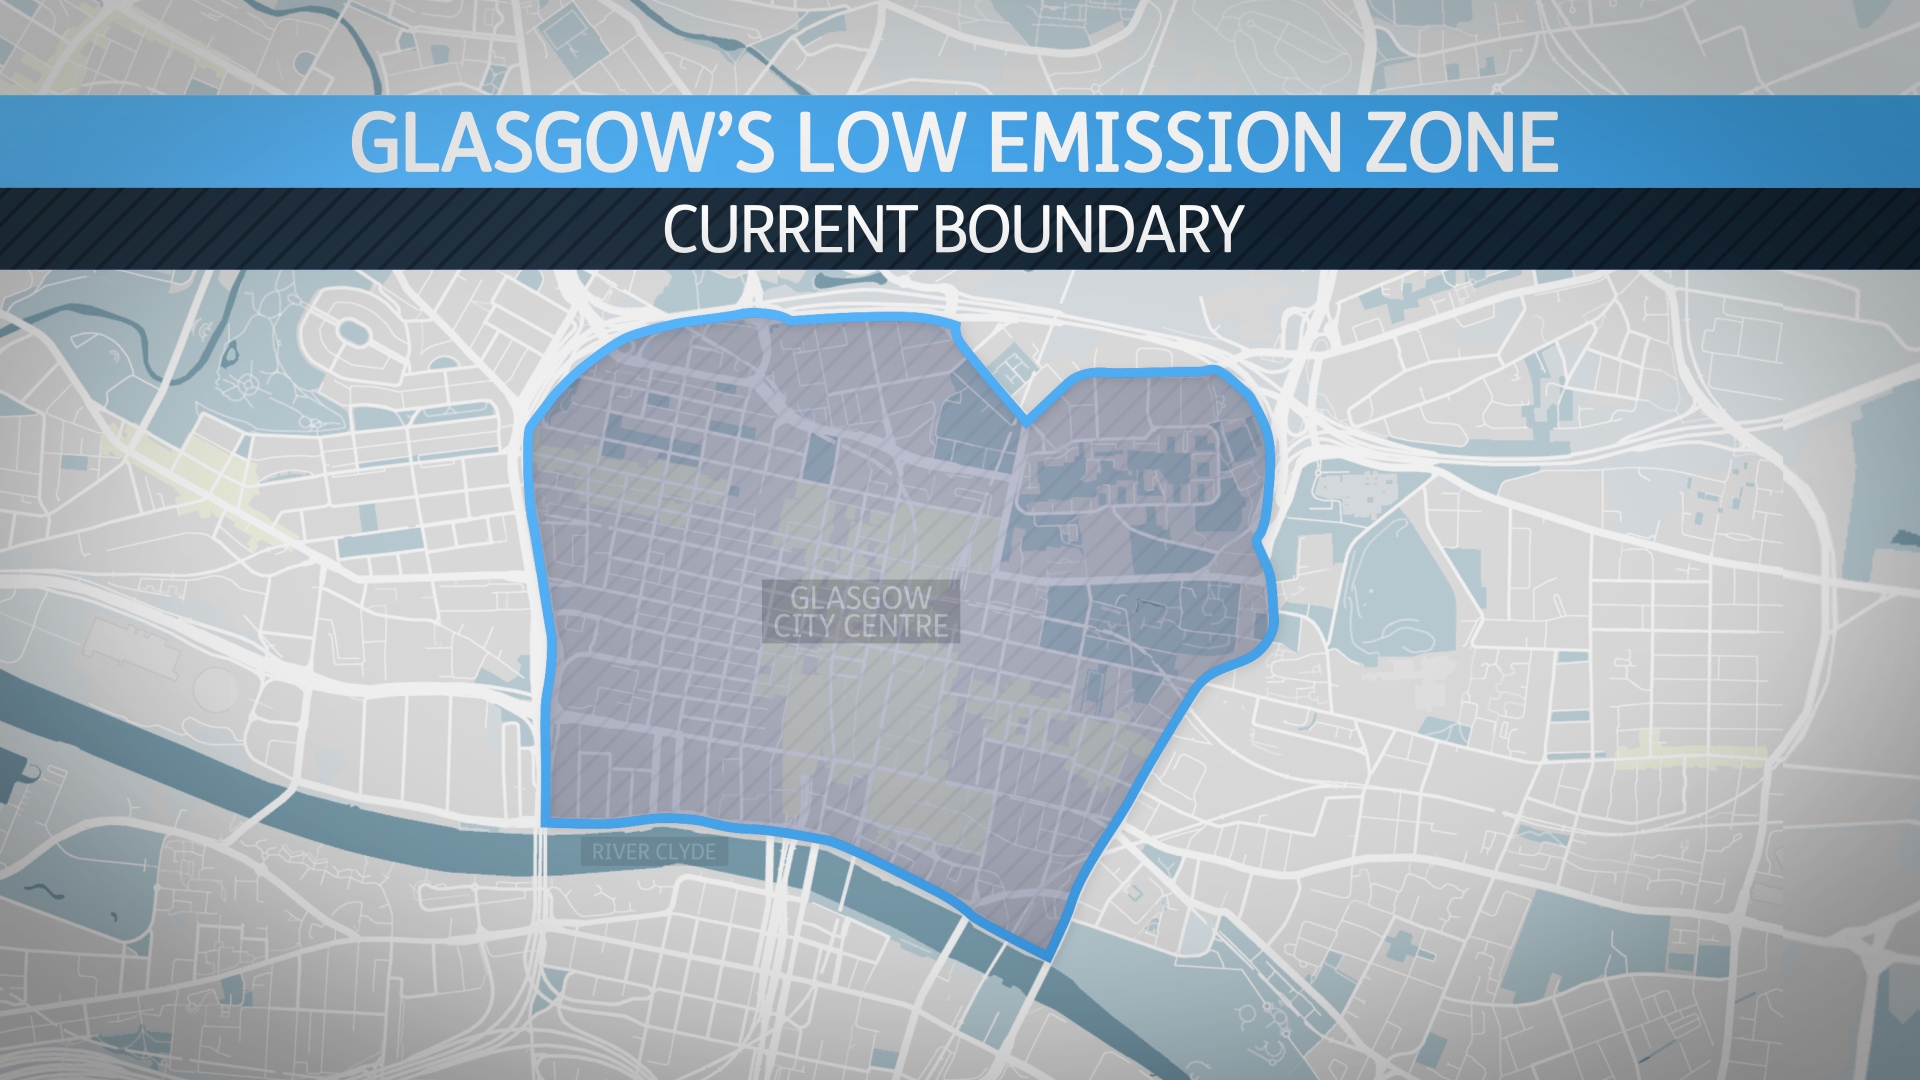 The Low Emissions Zone covers almost all Glasgow city centre.